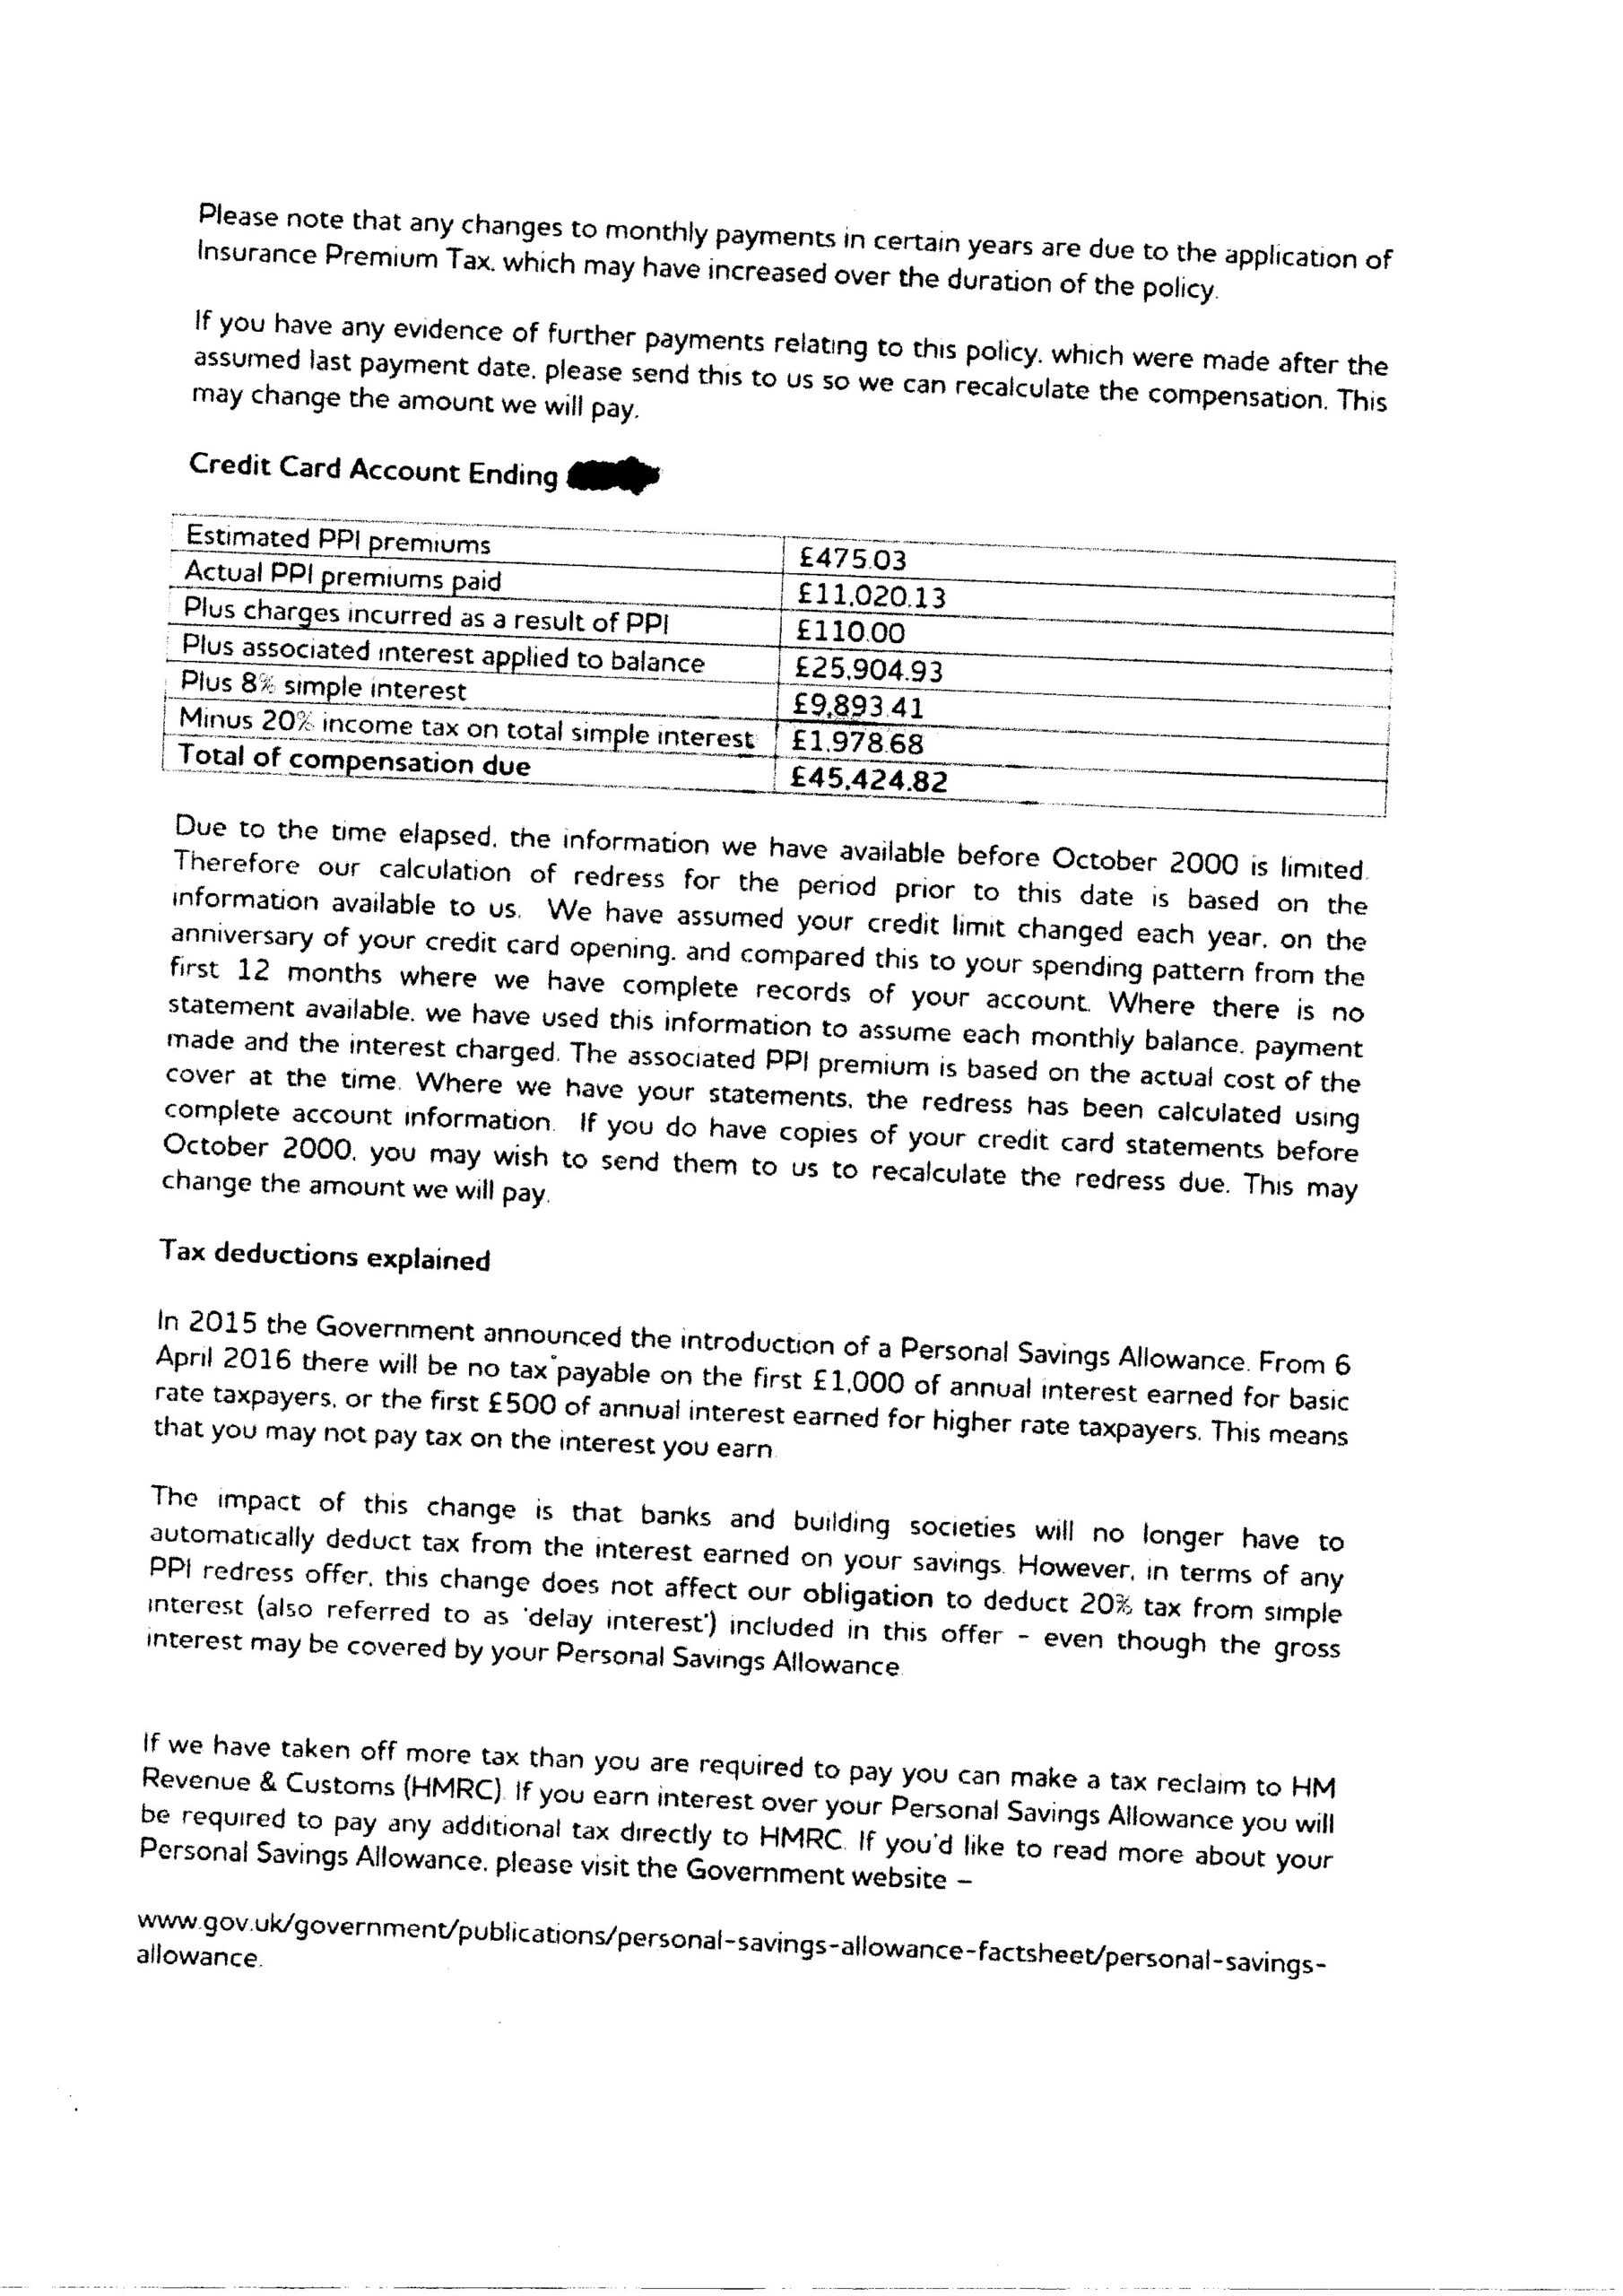 Ppi Claim Letter Template For Credit Card - Best Business intended for Ppi Claim Form Template Letter